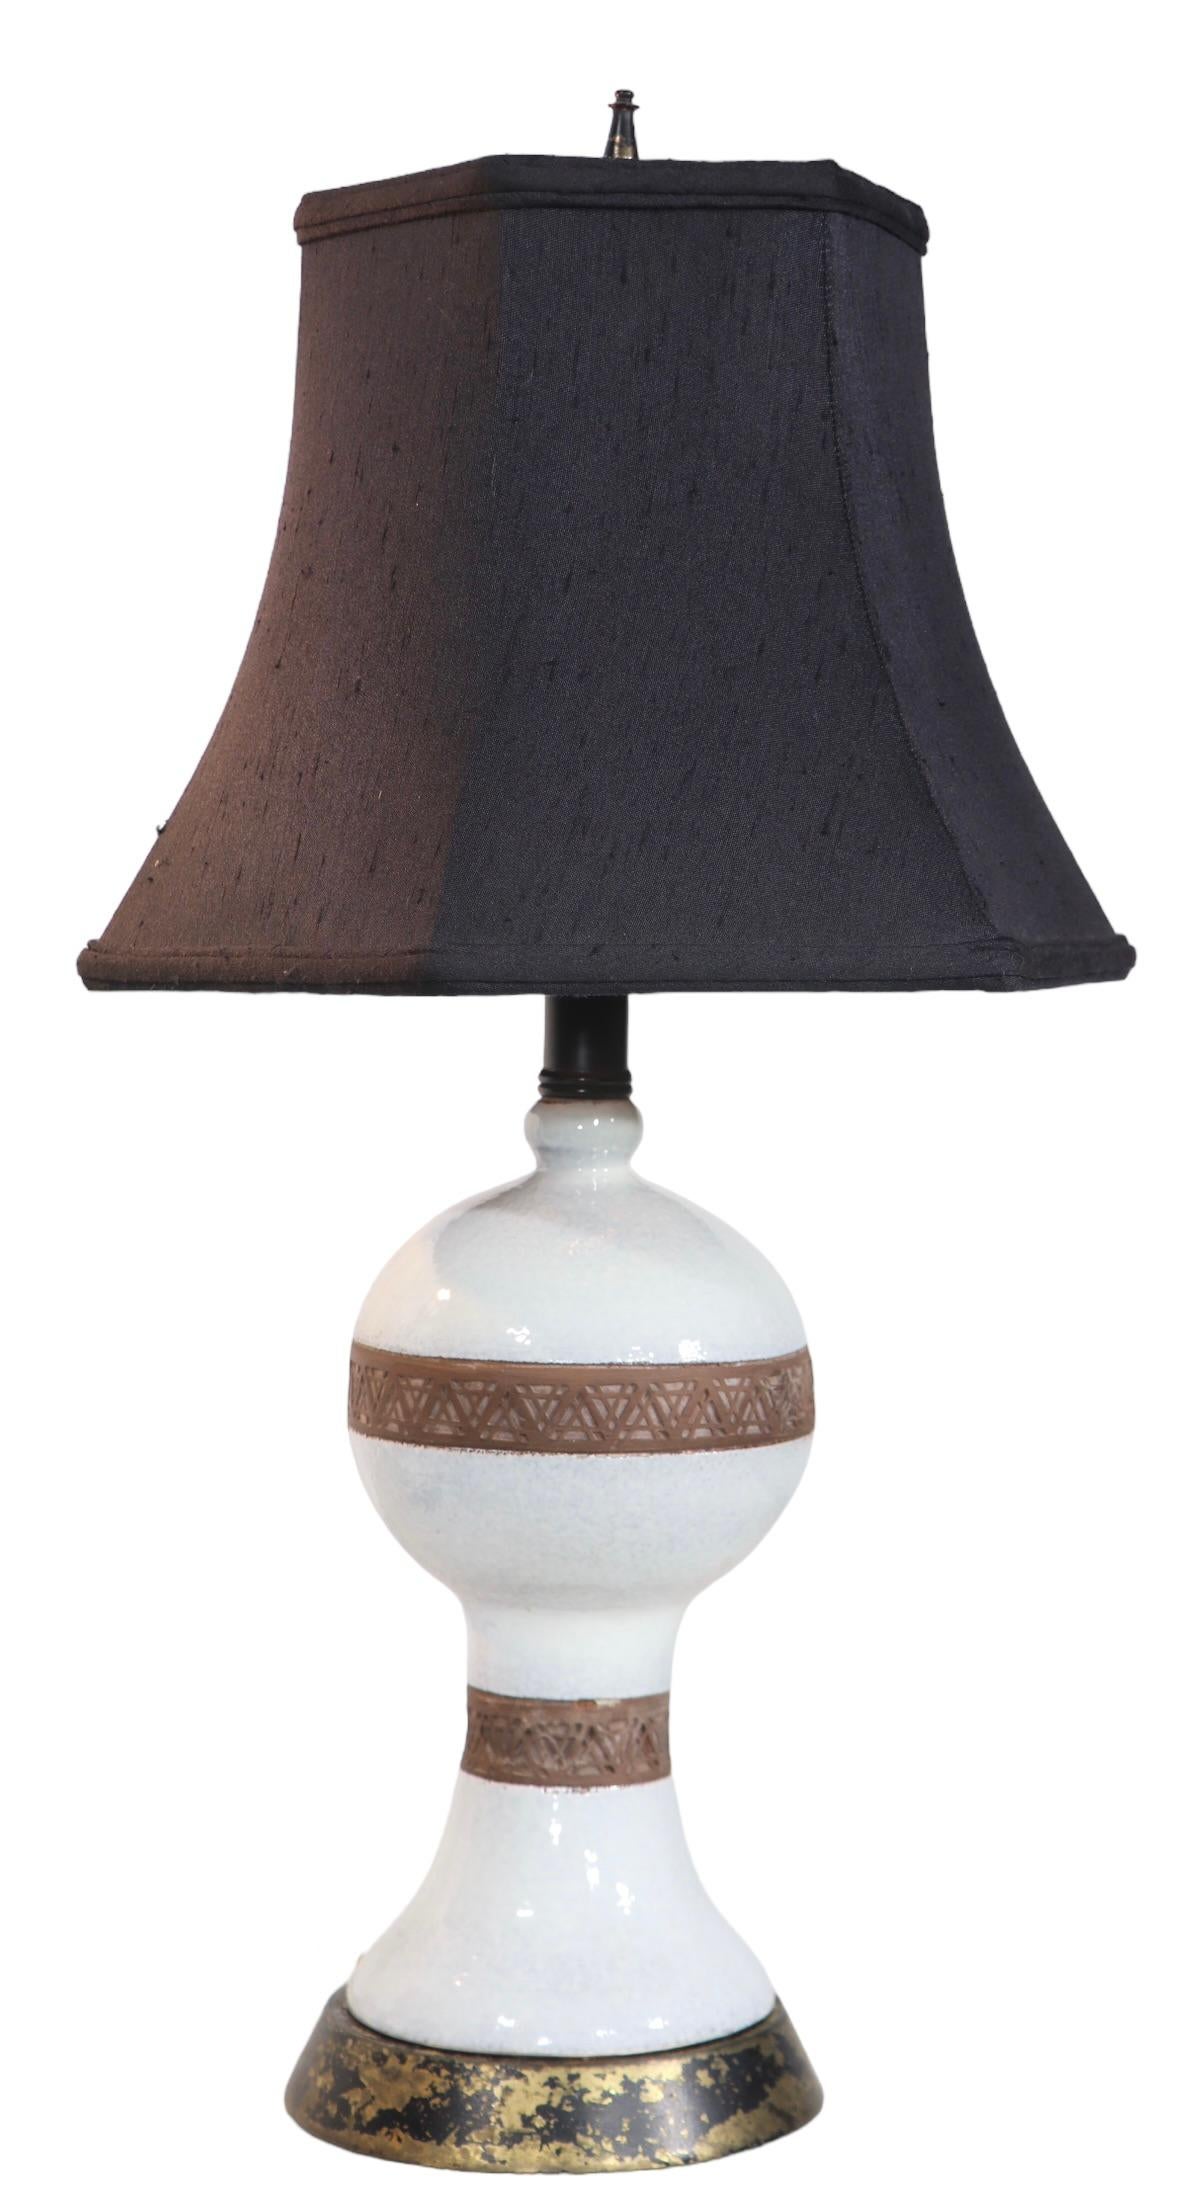 Pottery Pr. Ceramic Table Lamps Made in Italy Attr. to Urbano Zaccagnini  For Sale